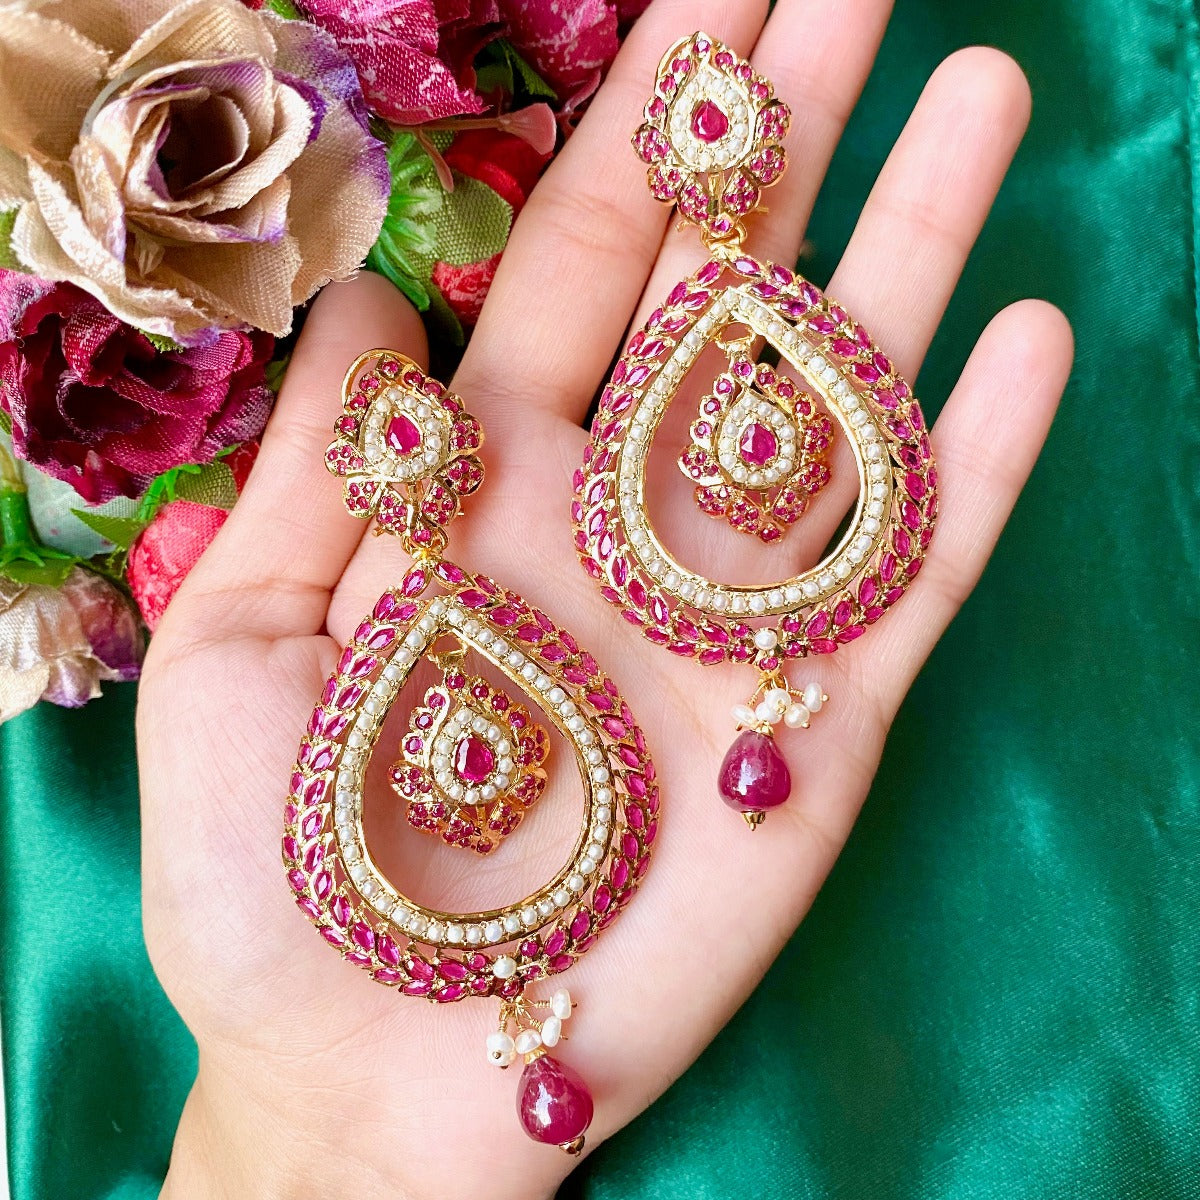 Multicolored Studded Chandbali Earrings in Gold Plated Silver ER 310